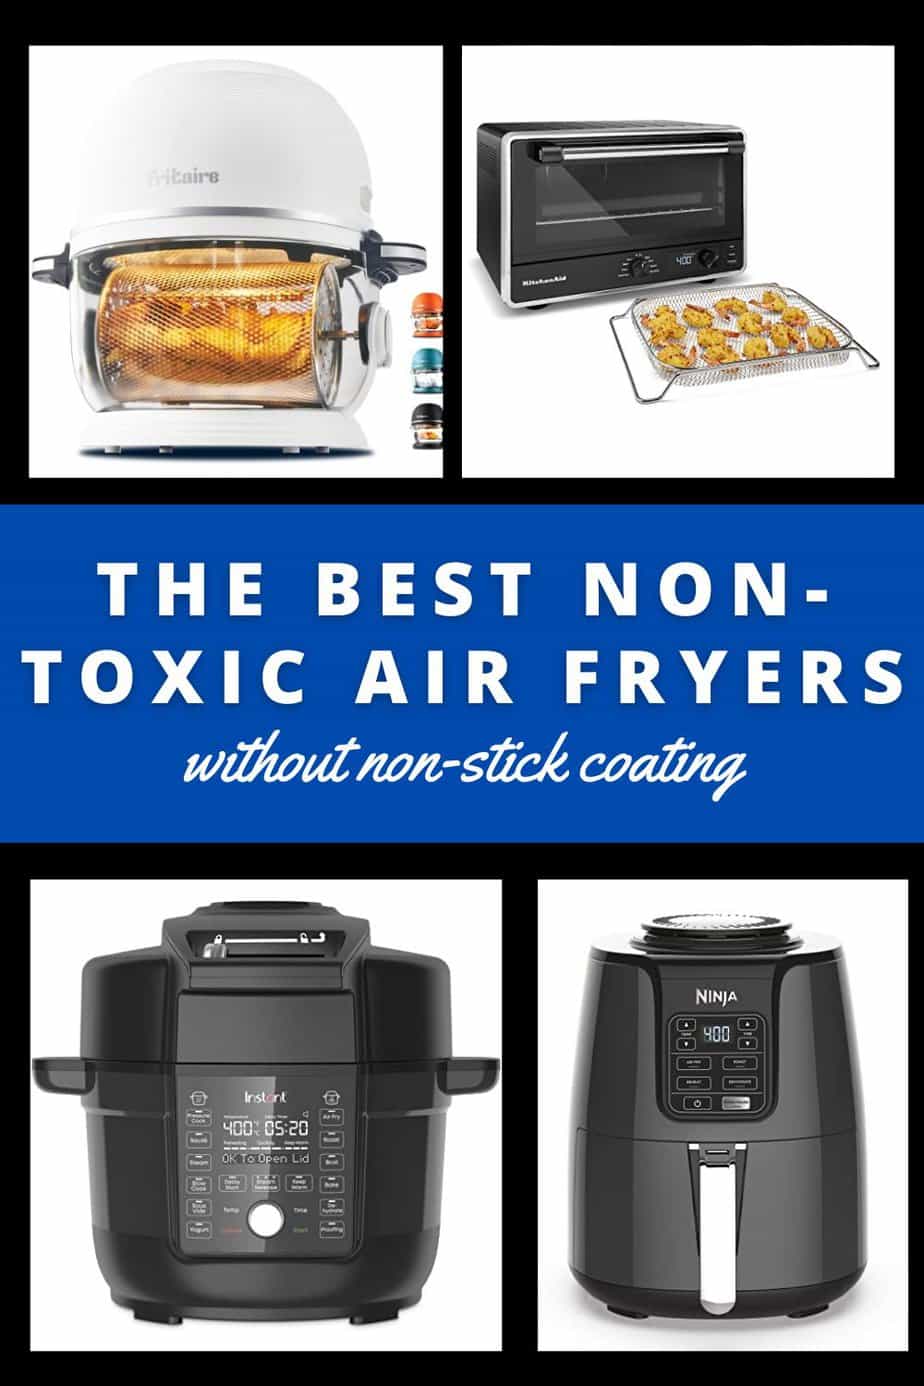 The Best Non-Toxic Air Fryers Without Non-stick Coating (Teflon